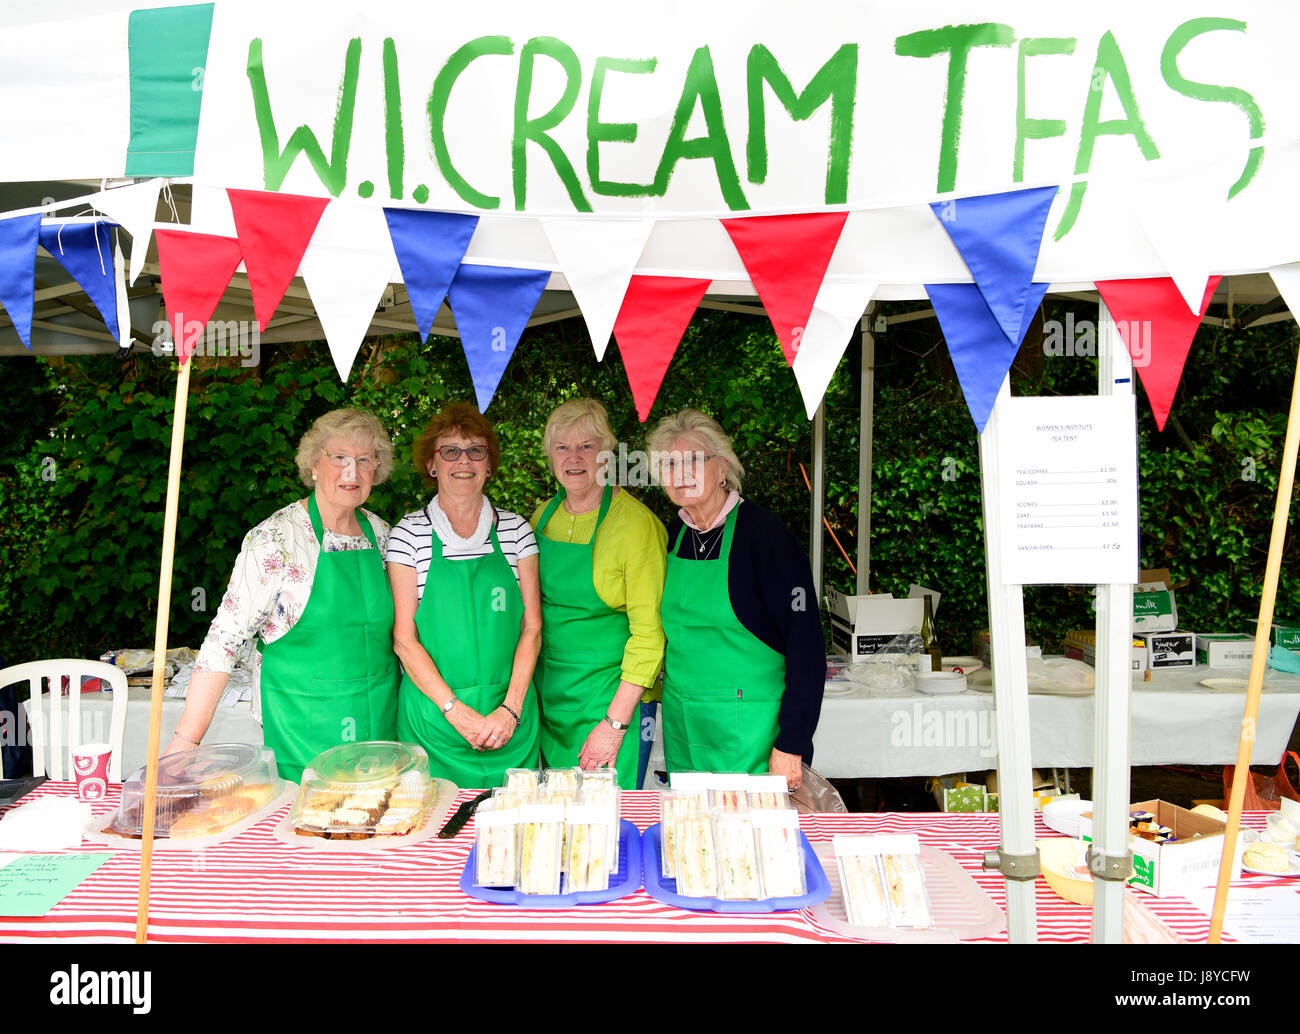 Four members of the Women's Institute (WI) on their cream tea stall/tea tent at a classic car festival, Haslemere, Surrey, UK. 28.05.2017. Stock Photo